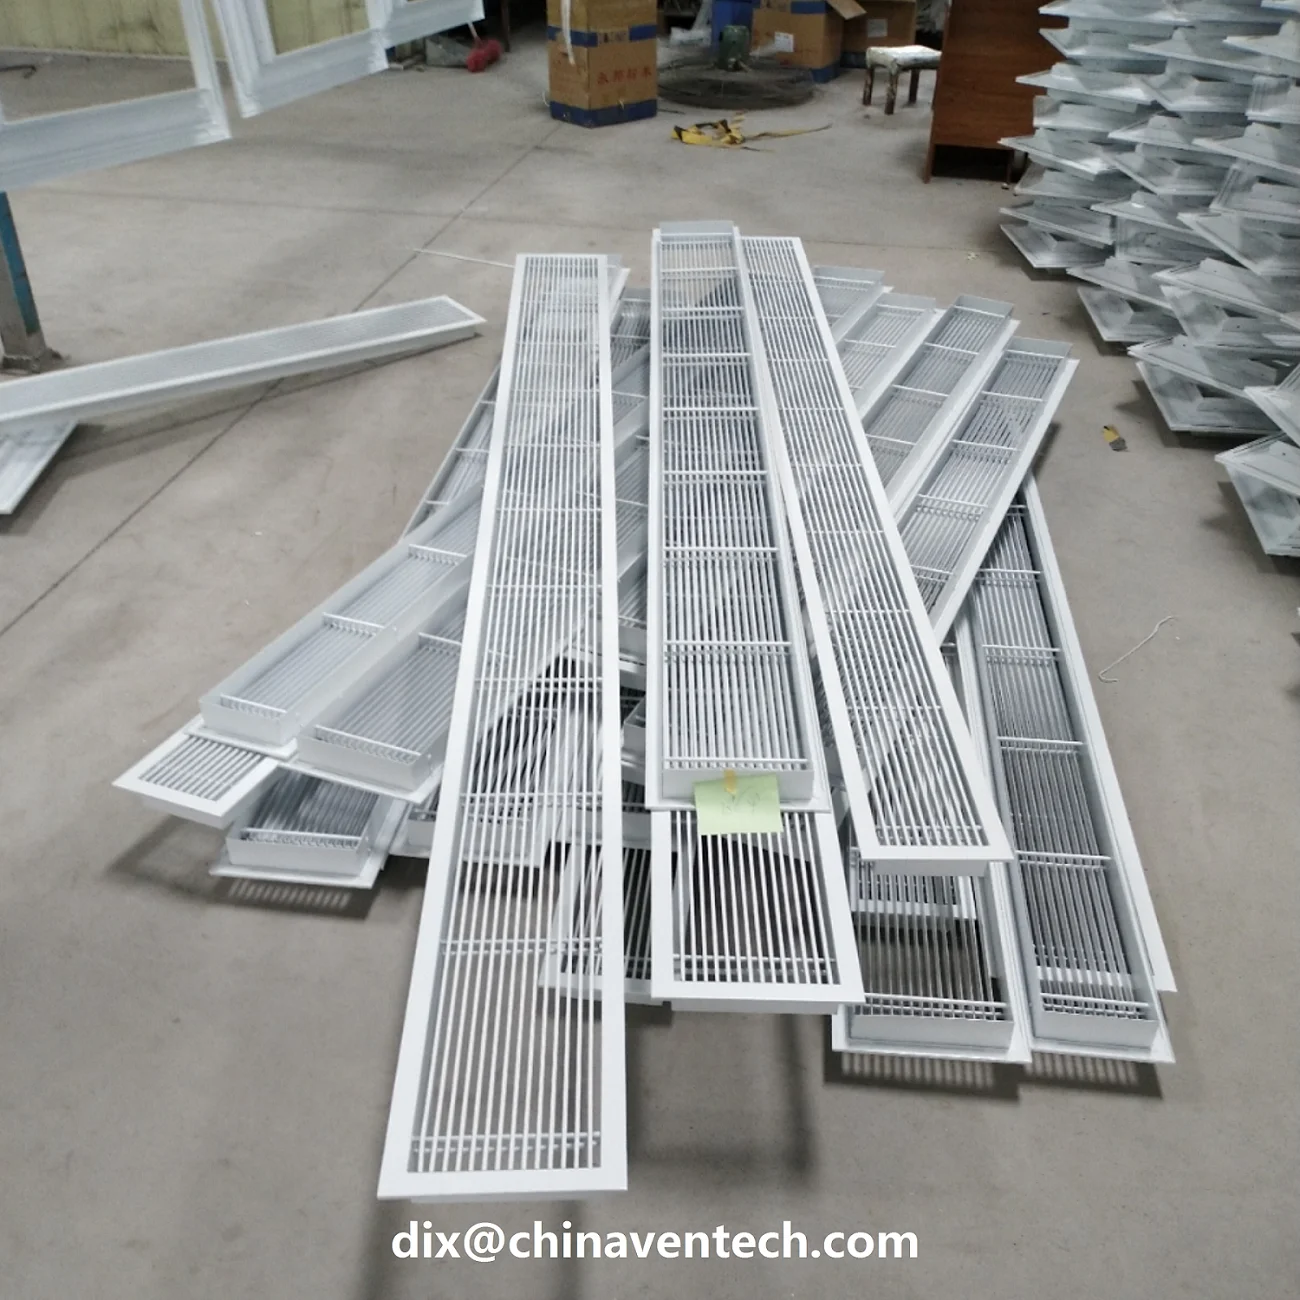 HVAC linear slot diffuser air vent return air flat bar grille for ventilaiton system used